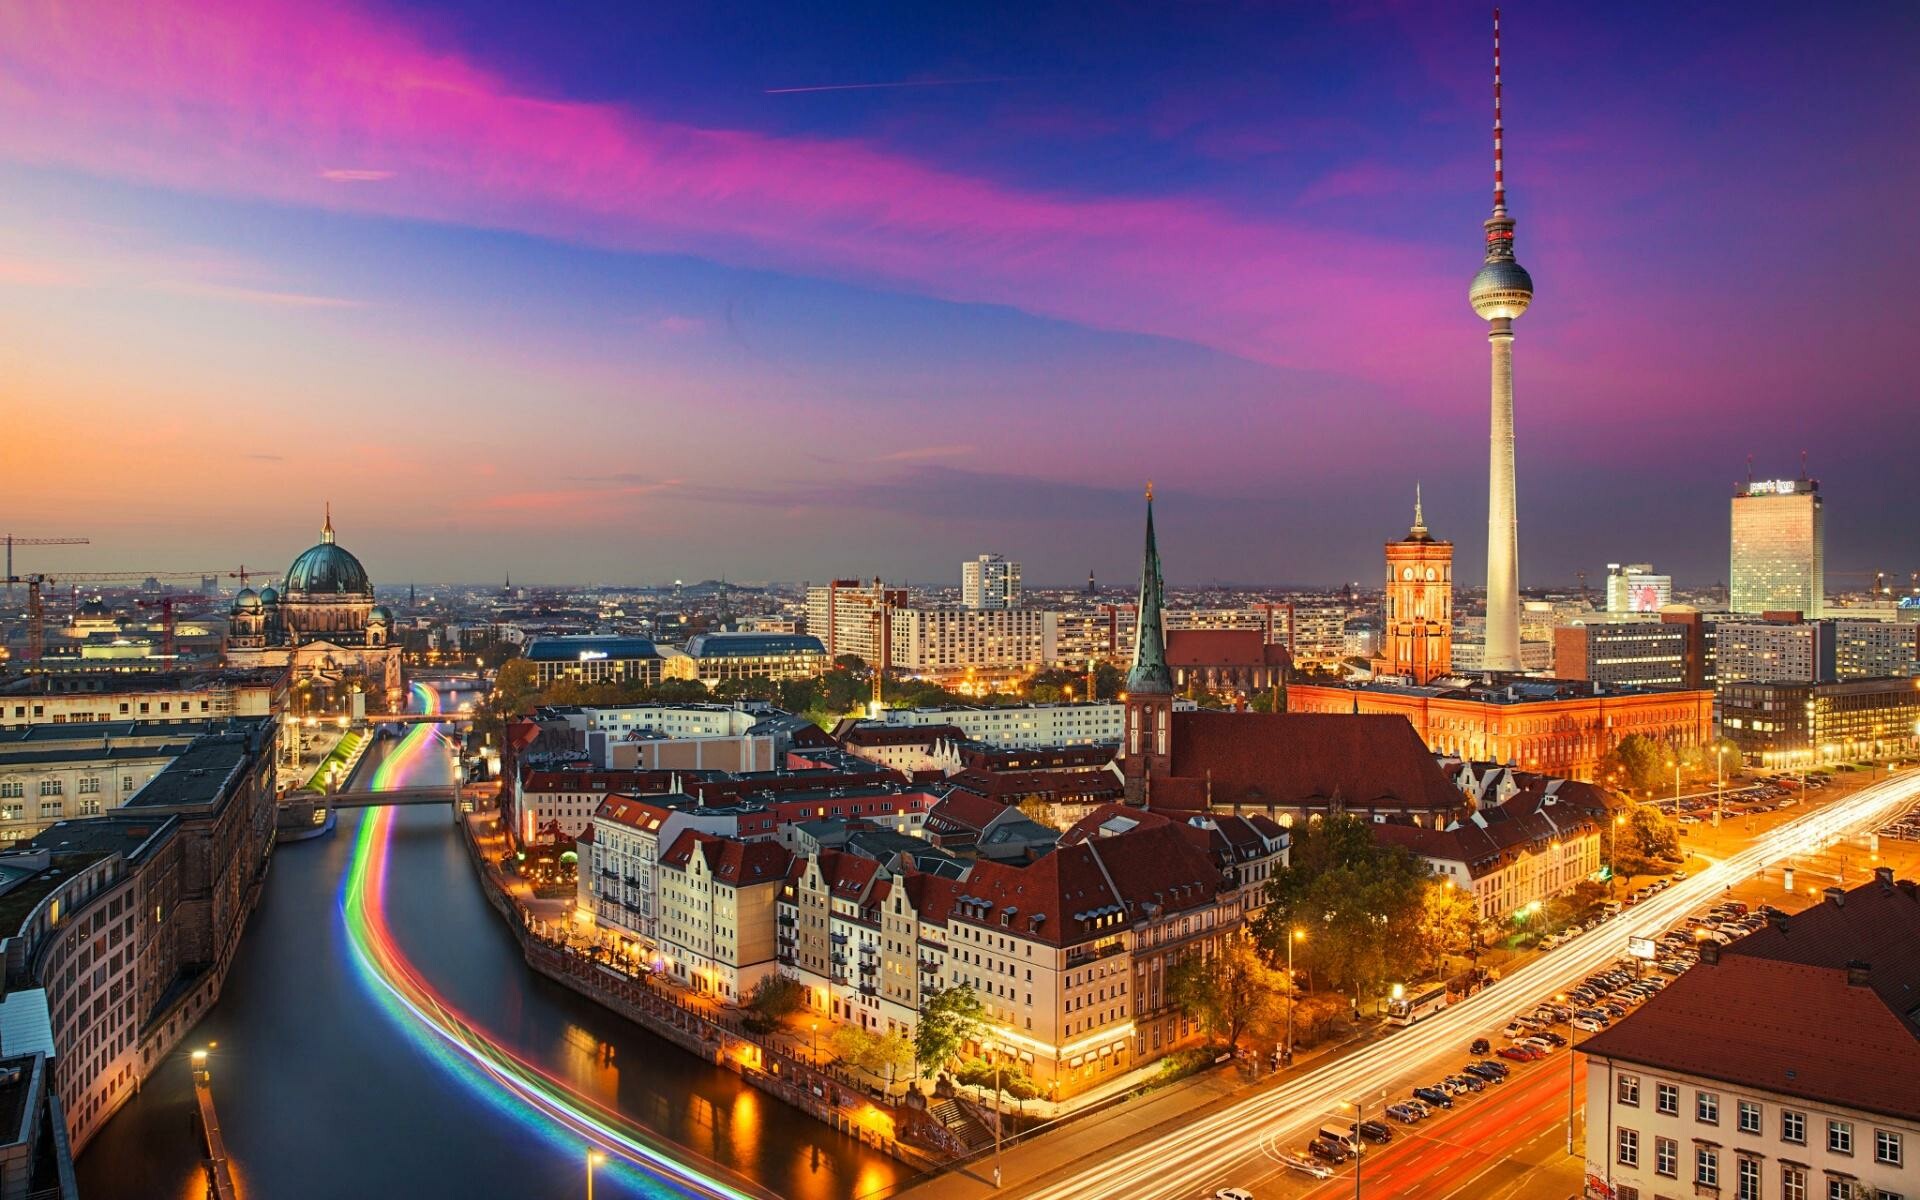 Germany: Berlin City, The most populous member state in the European Union. 1920x1200 HD Wallpaper.